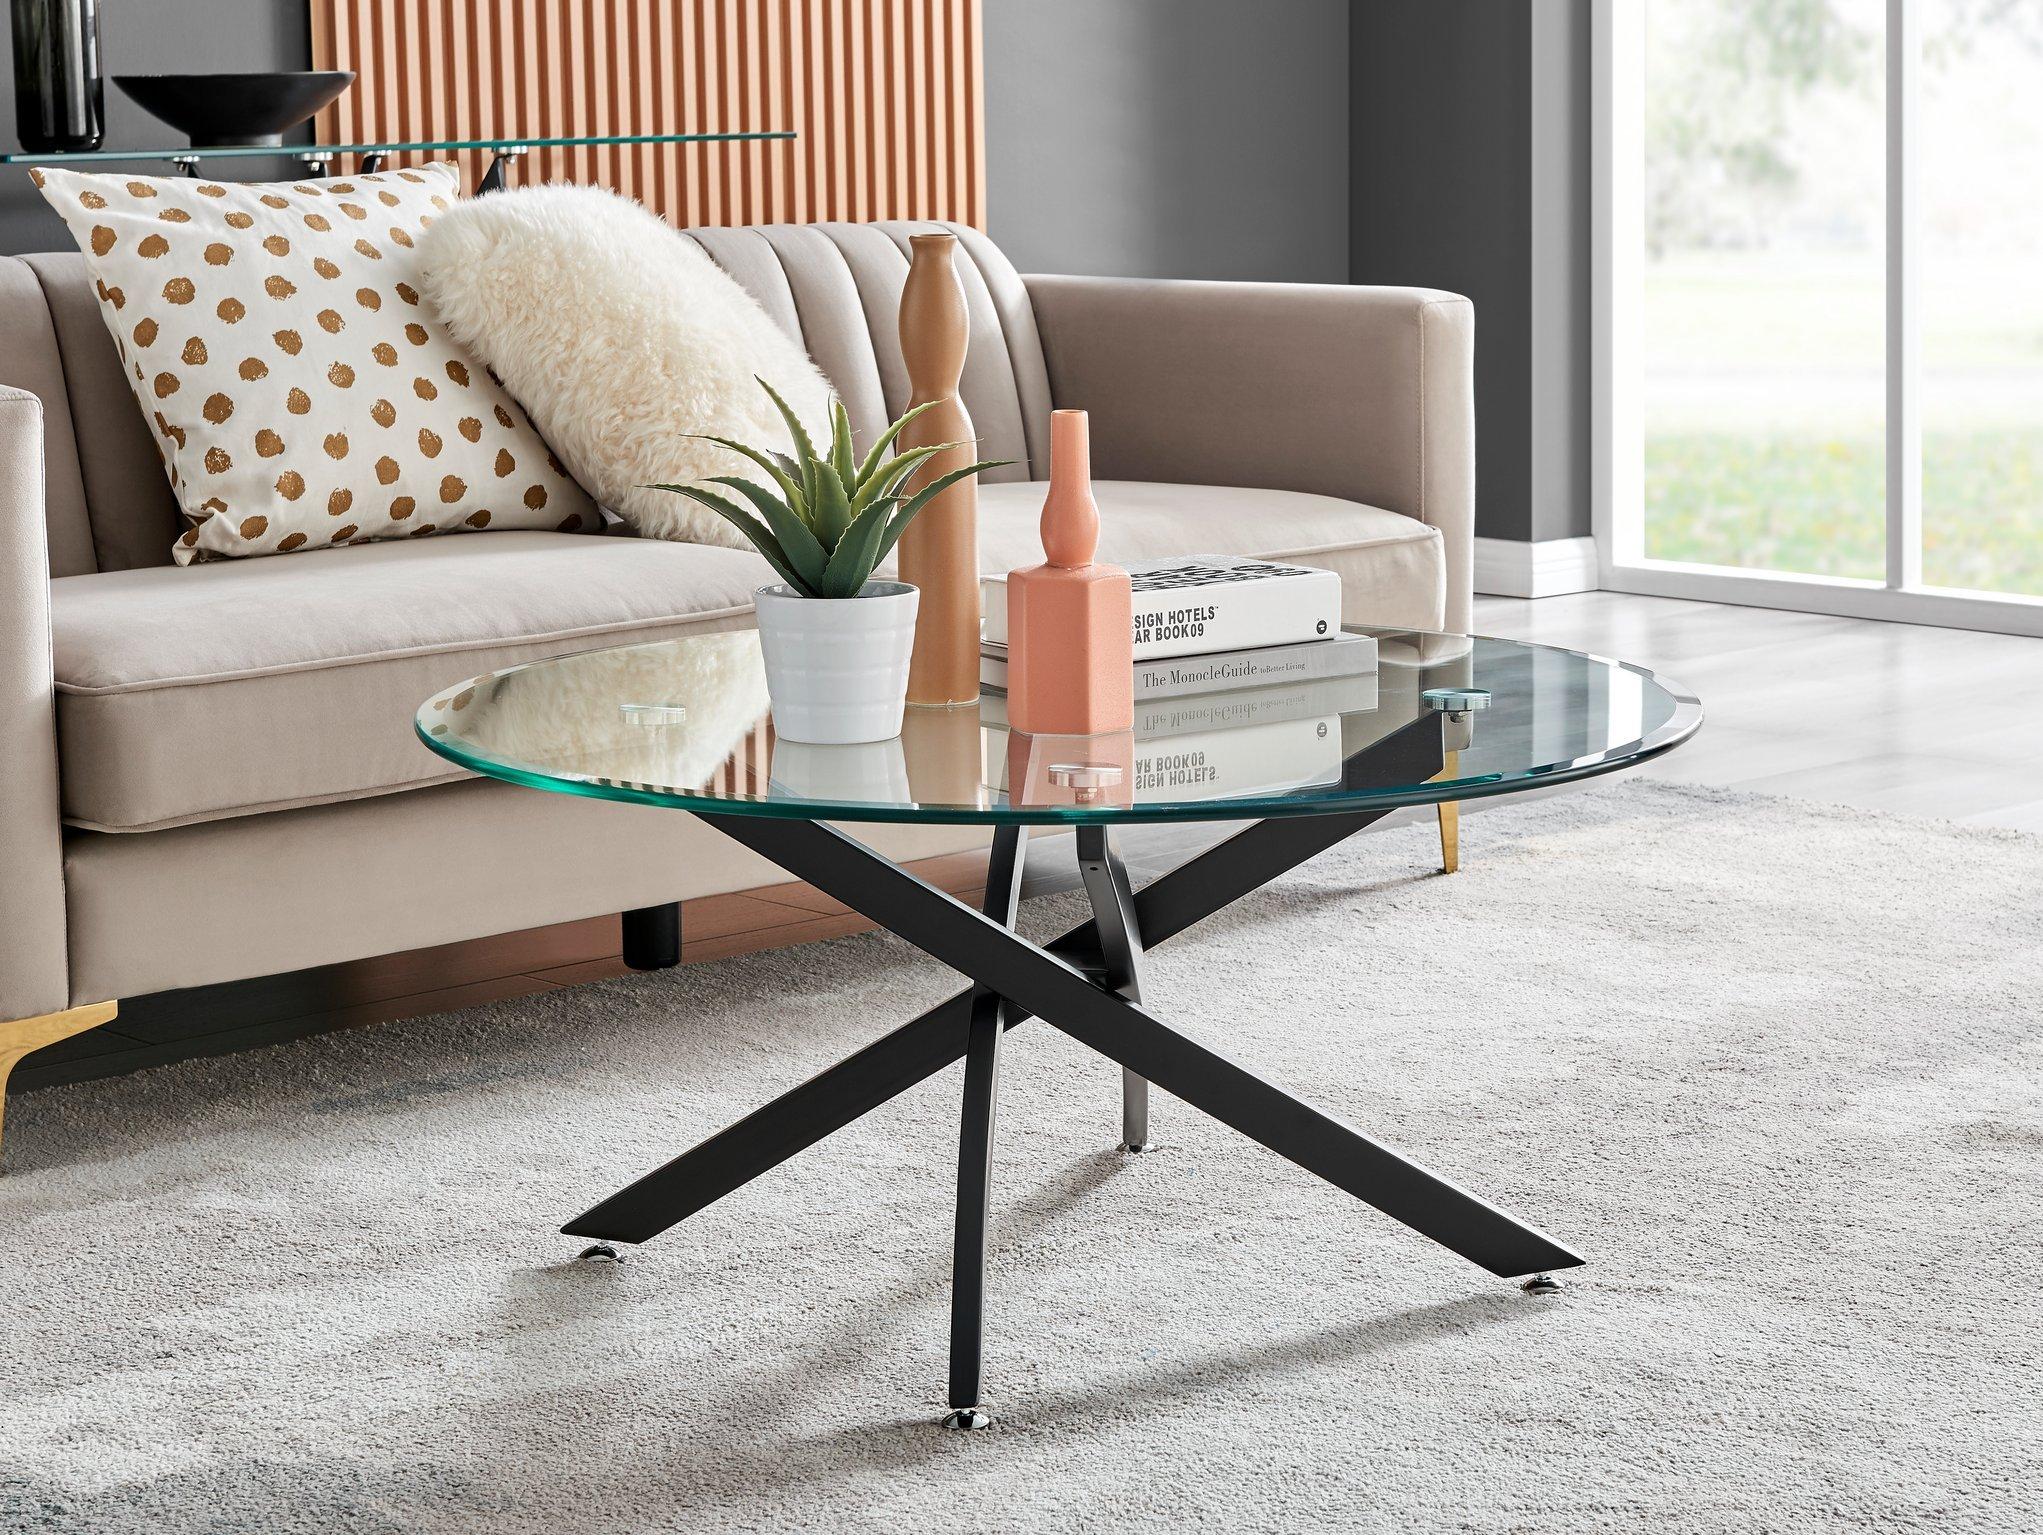 Novara Round Glass Coffee Table with Angled Starburst Metal Legs for Modern Glam Minimalist Living R